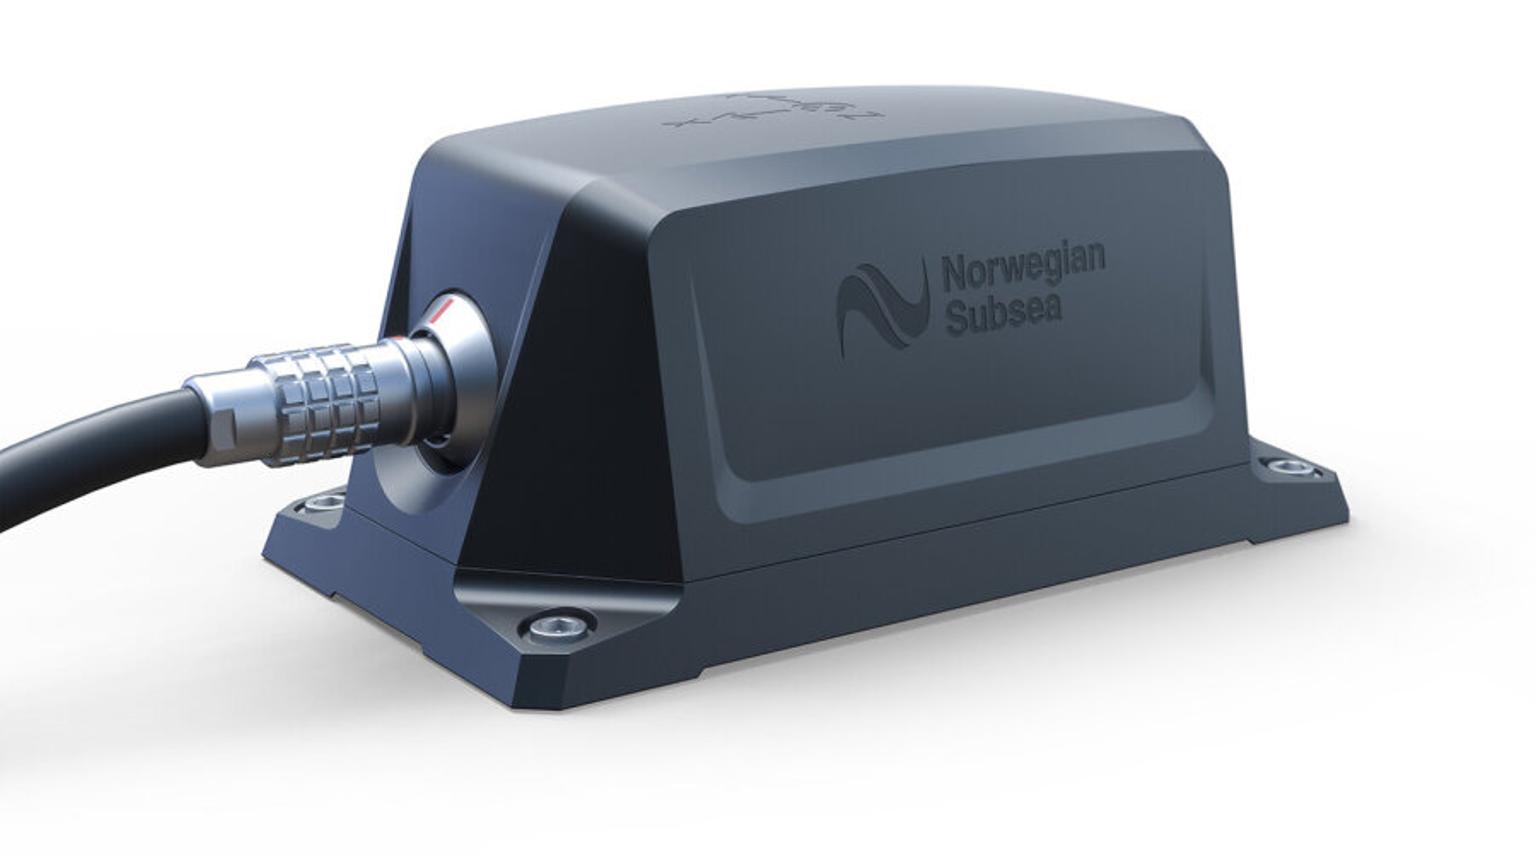 Norwegian Subsea’s MRUs are highly accurate, reliable and affordable.